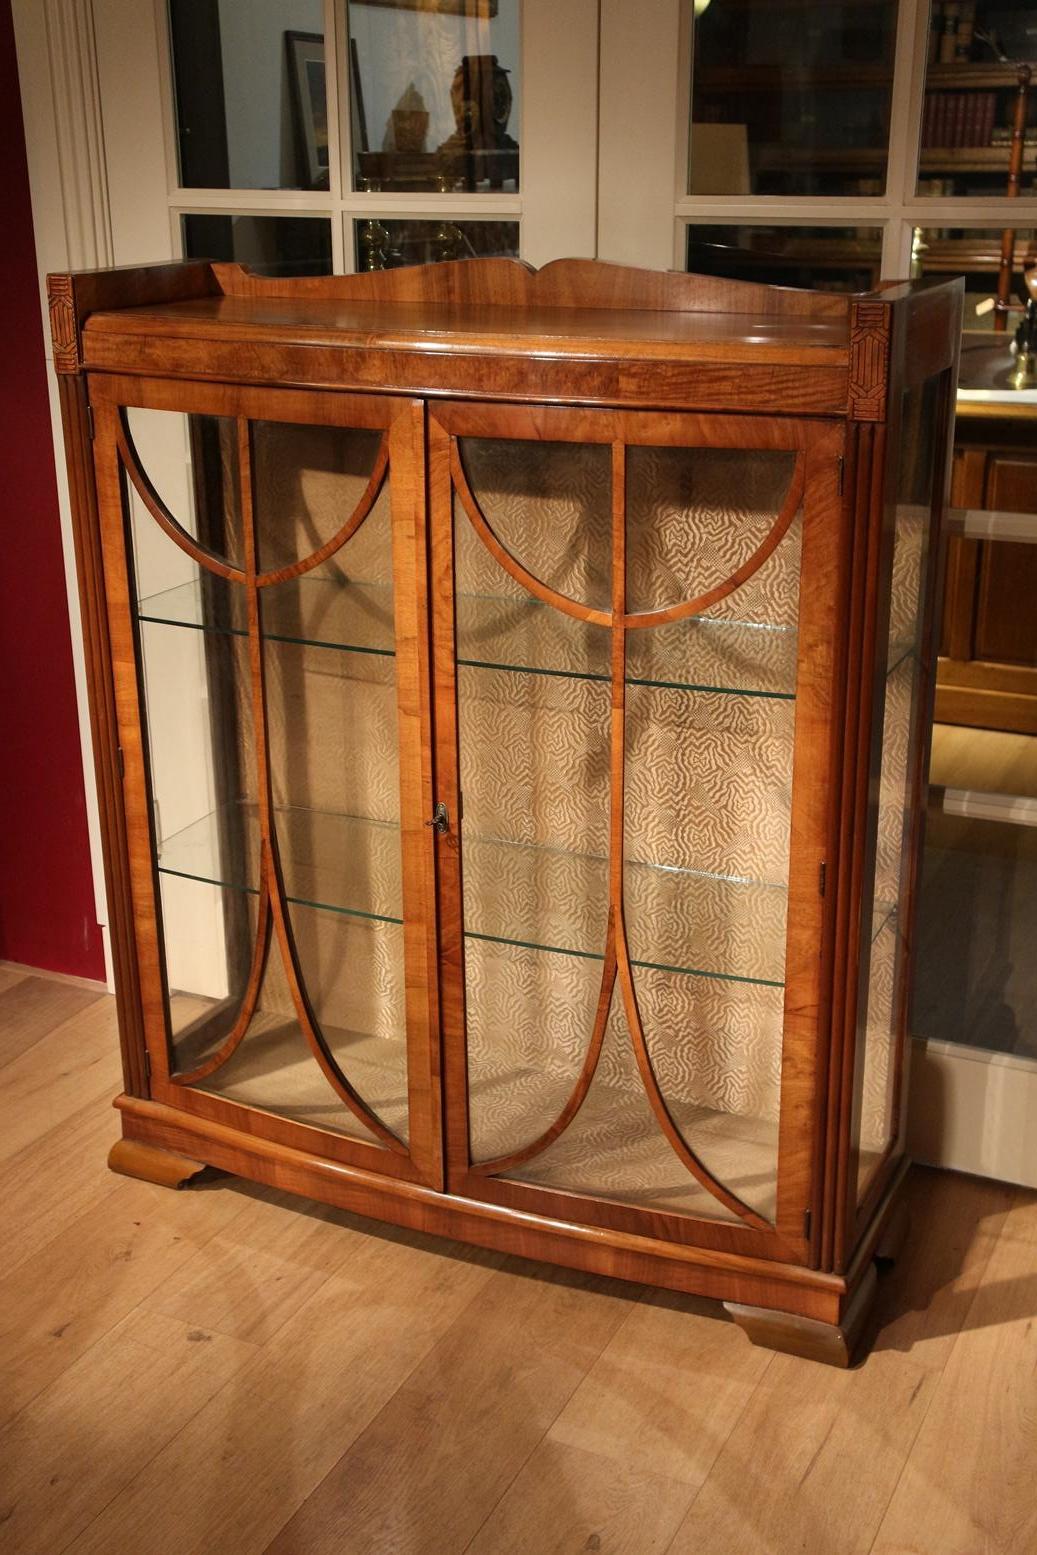 Beautiful Art Deco display case in walnut. Slightly curved from the front. Equipped with 2 glass shelves.
Completely in good and original condition.

Origin: England
Period: Approximate 1920-1930
Size: Bro. 84 cm, D. 33 cm, H. 104 cm.